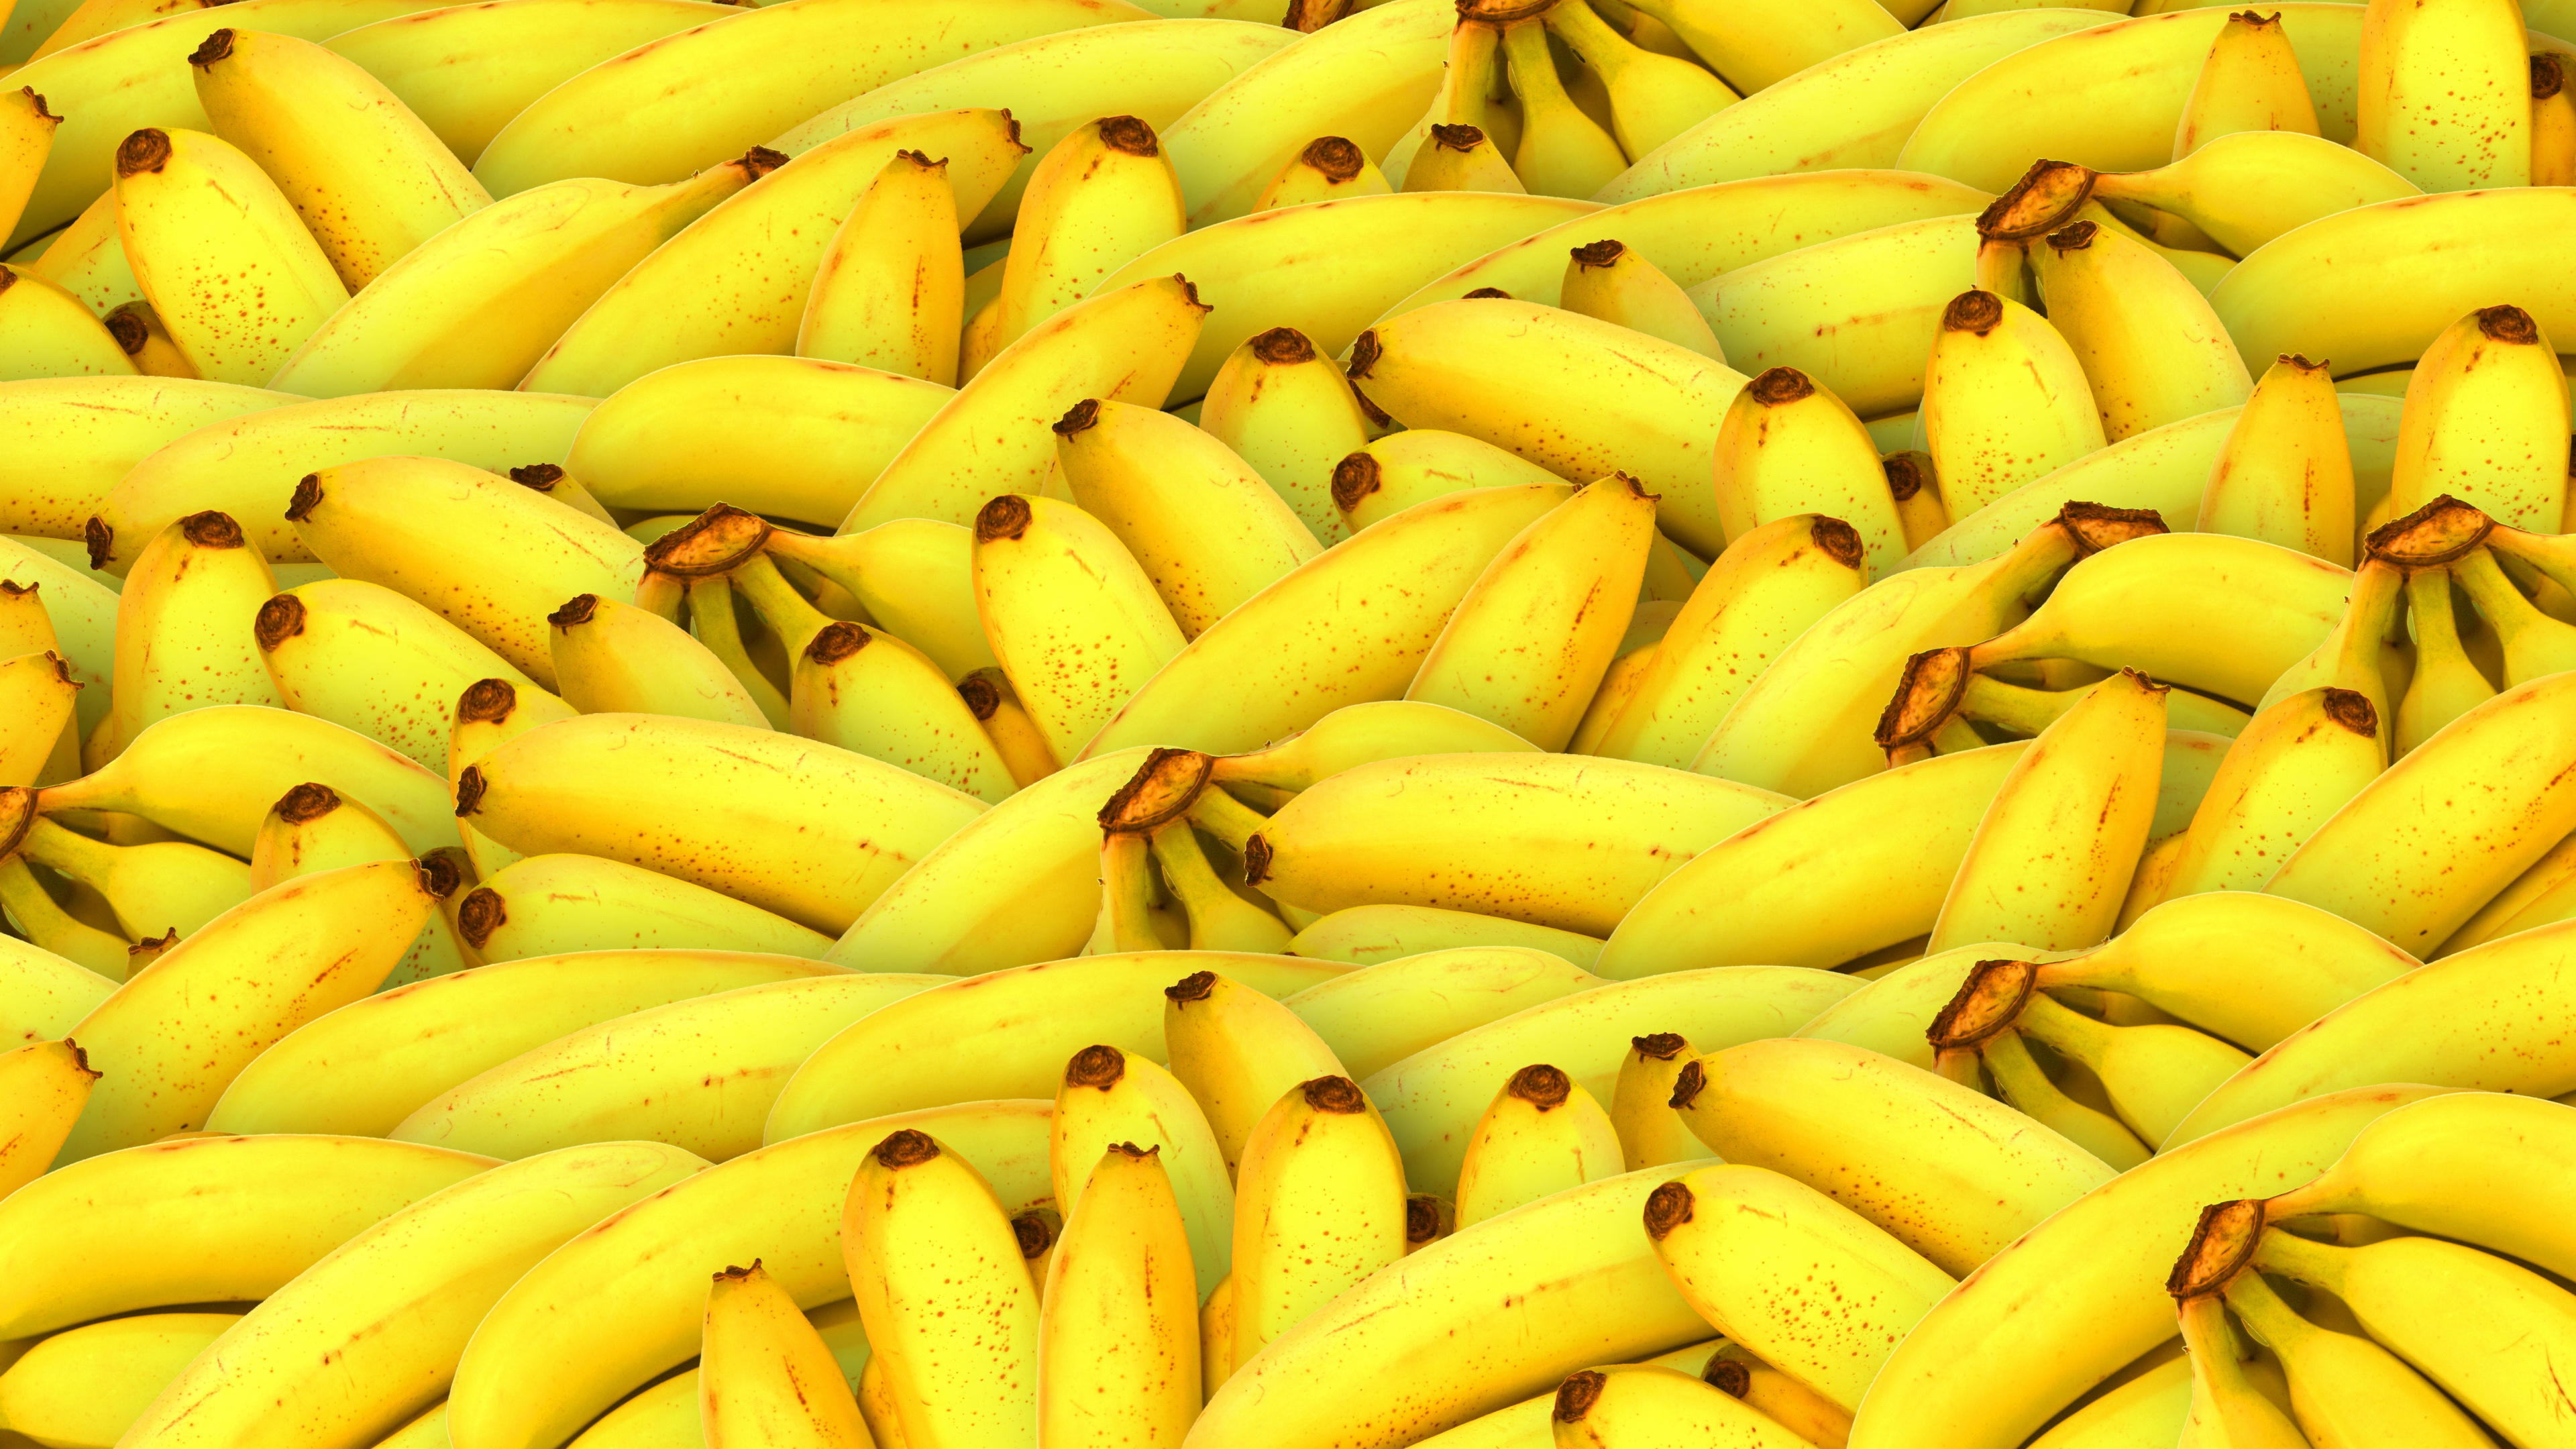 Yellow Banana Fruit on Brown Wooden Table. Wallpaper in 3840x2160 Resolution